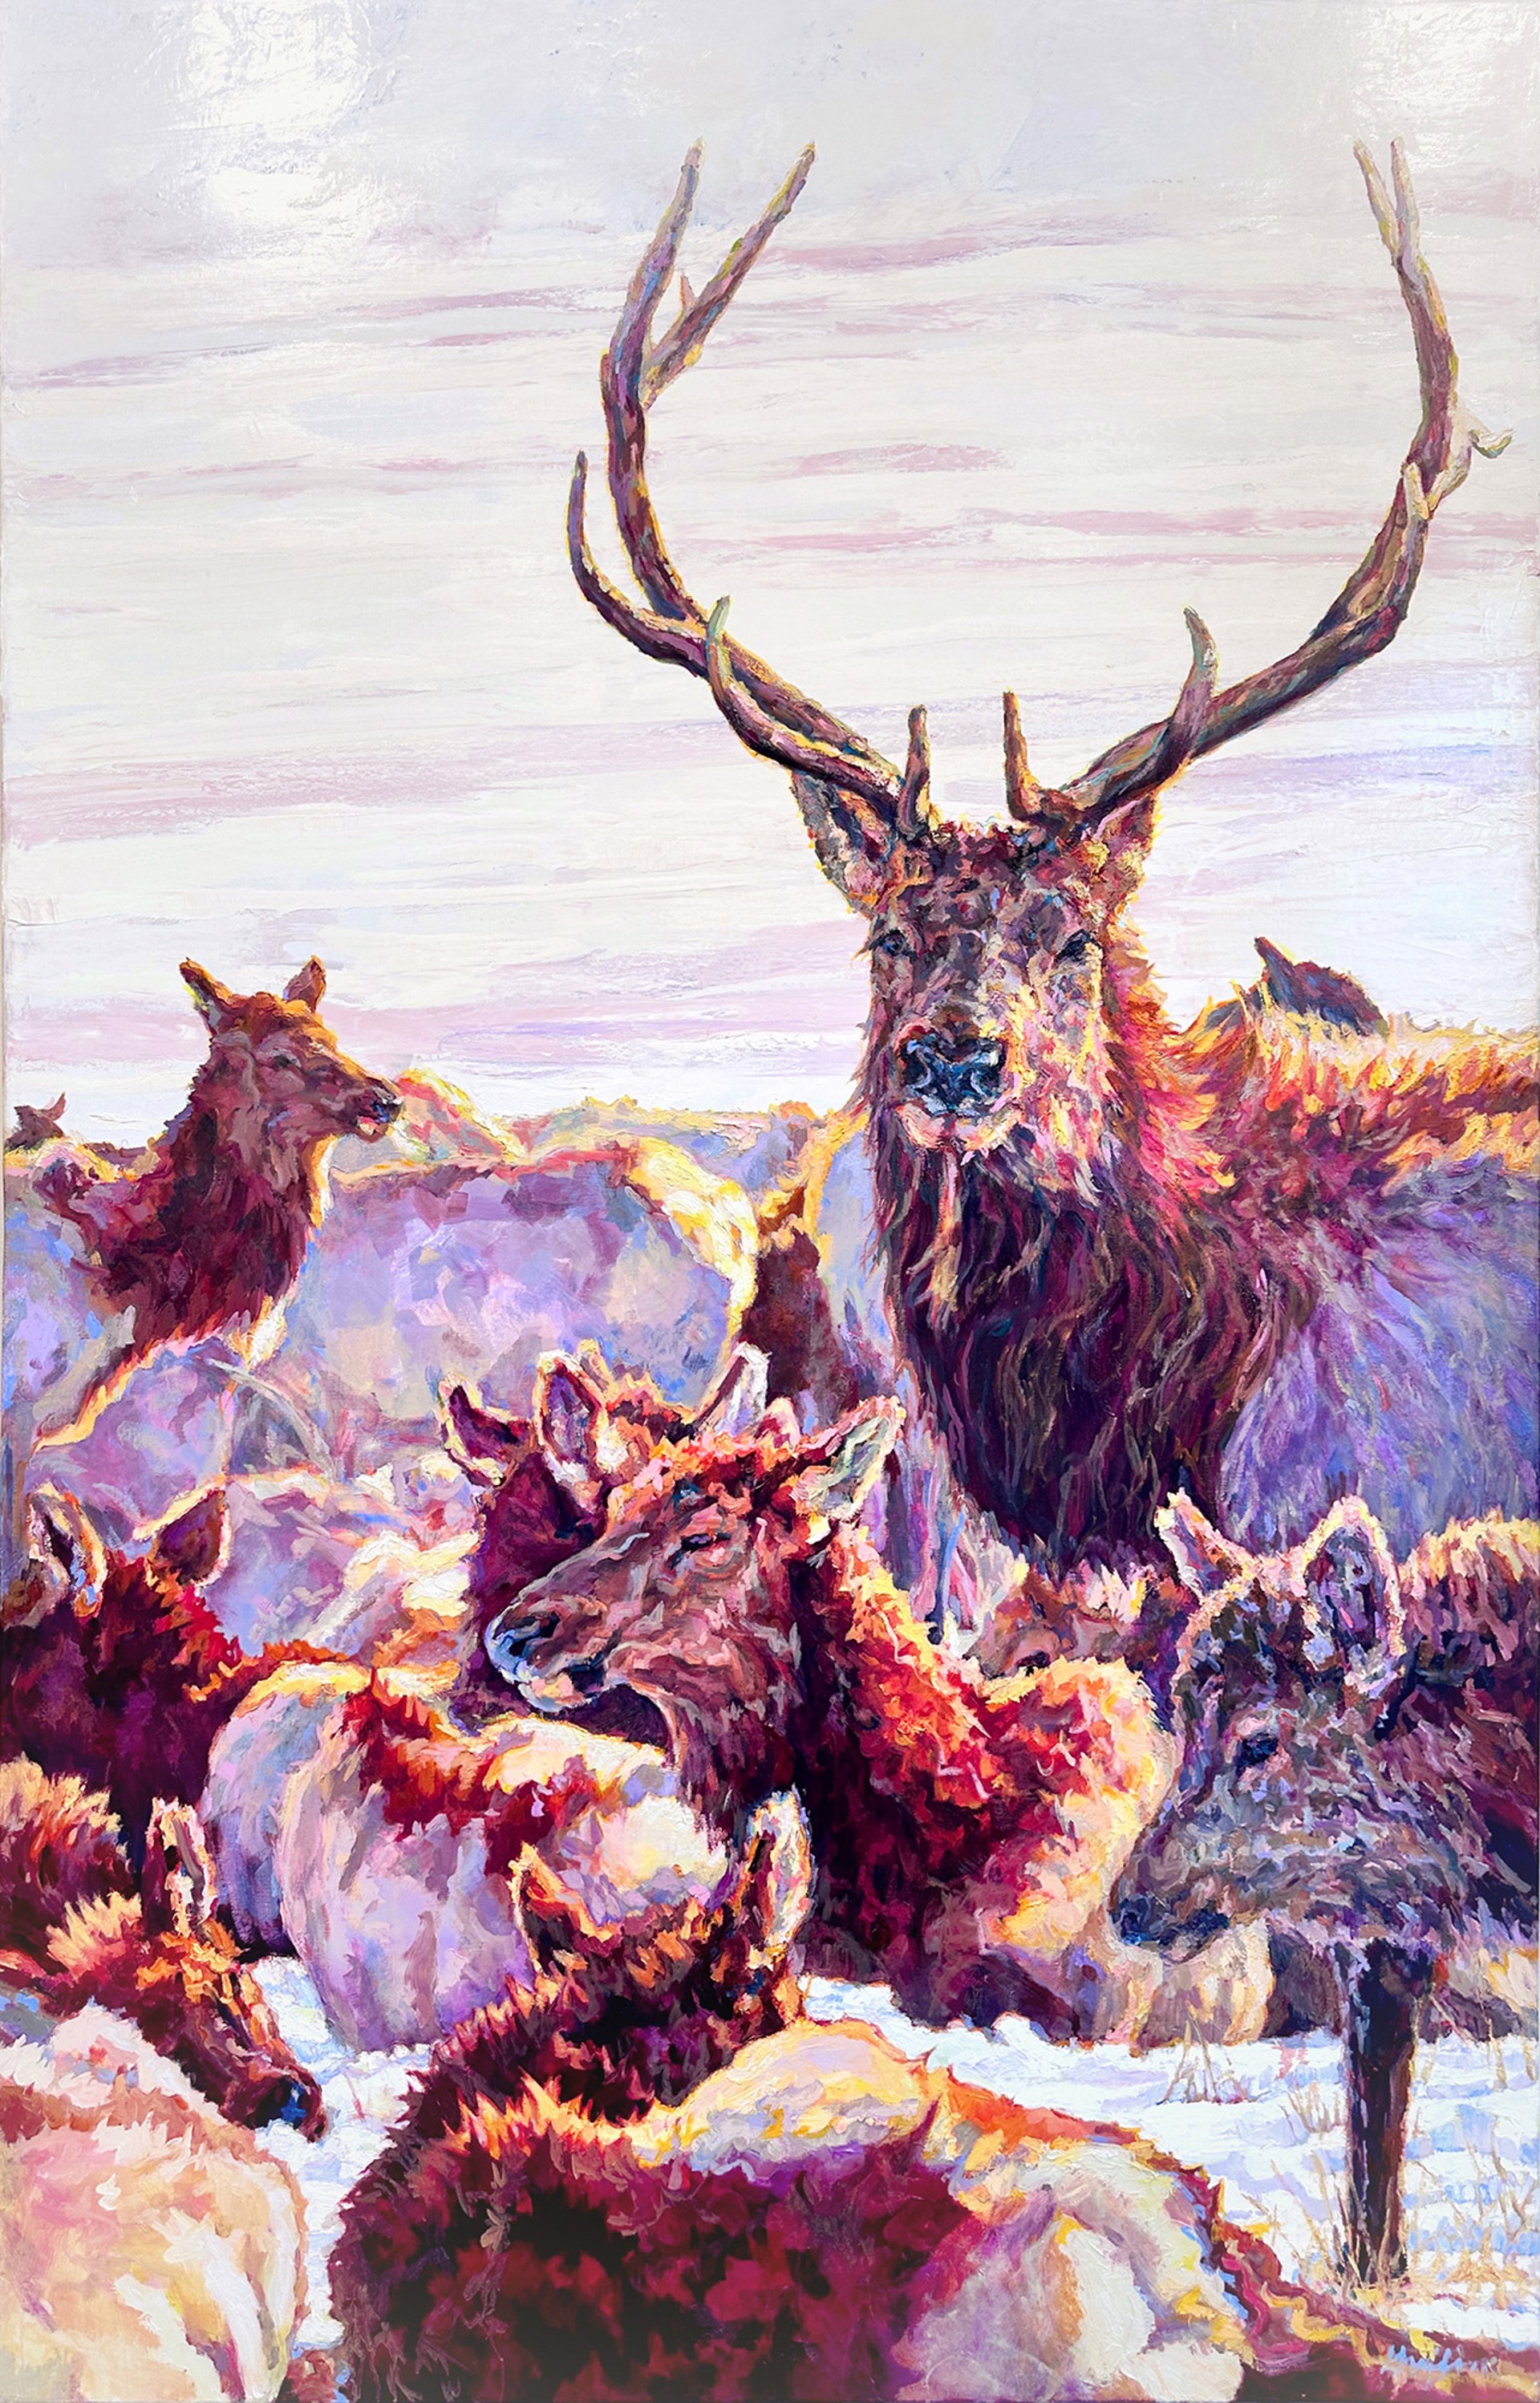 Oil Painting On Linen Of Elk With Pink And Purple Hues